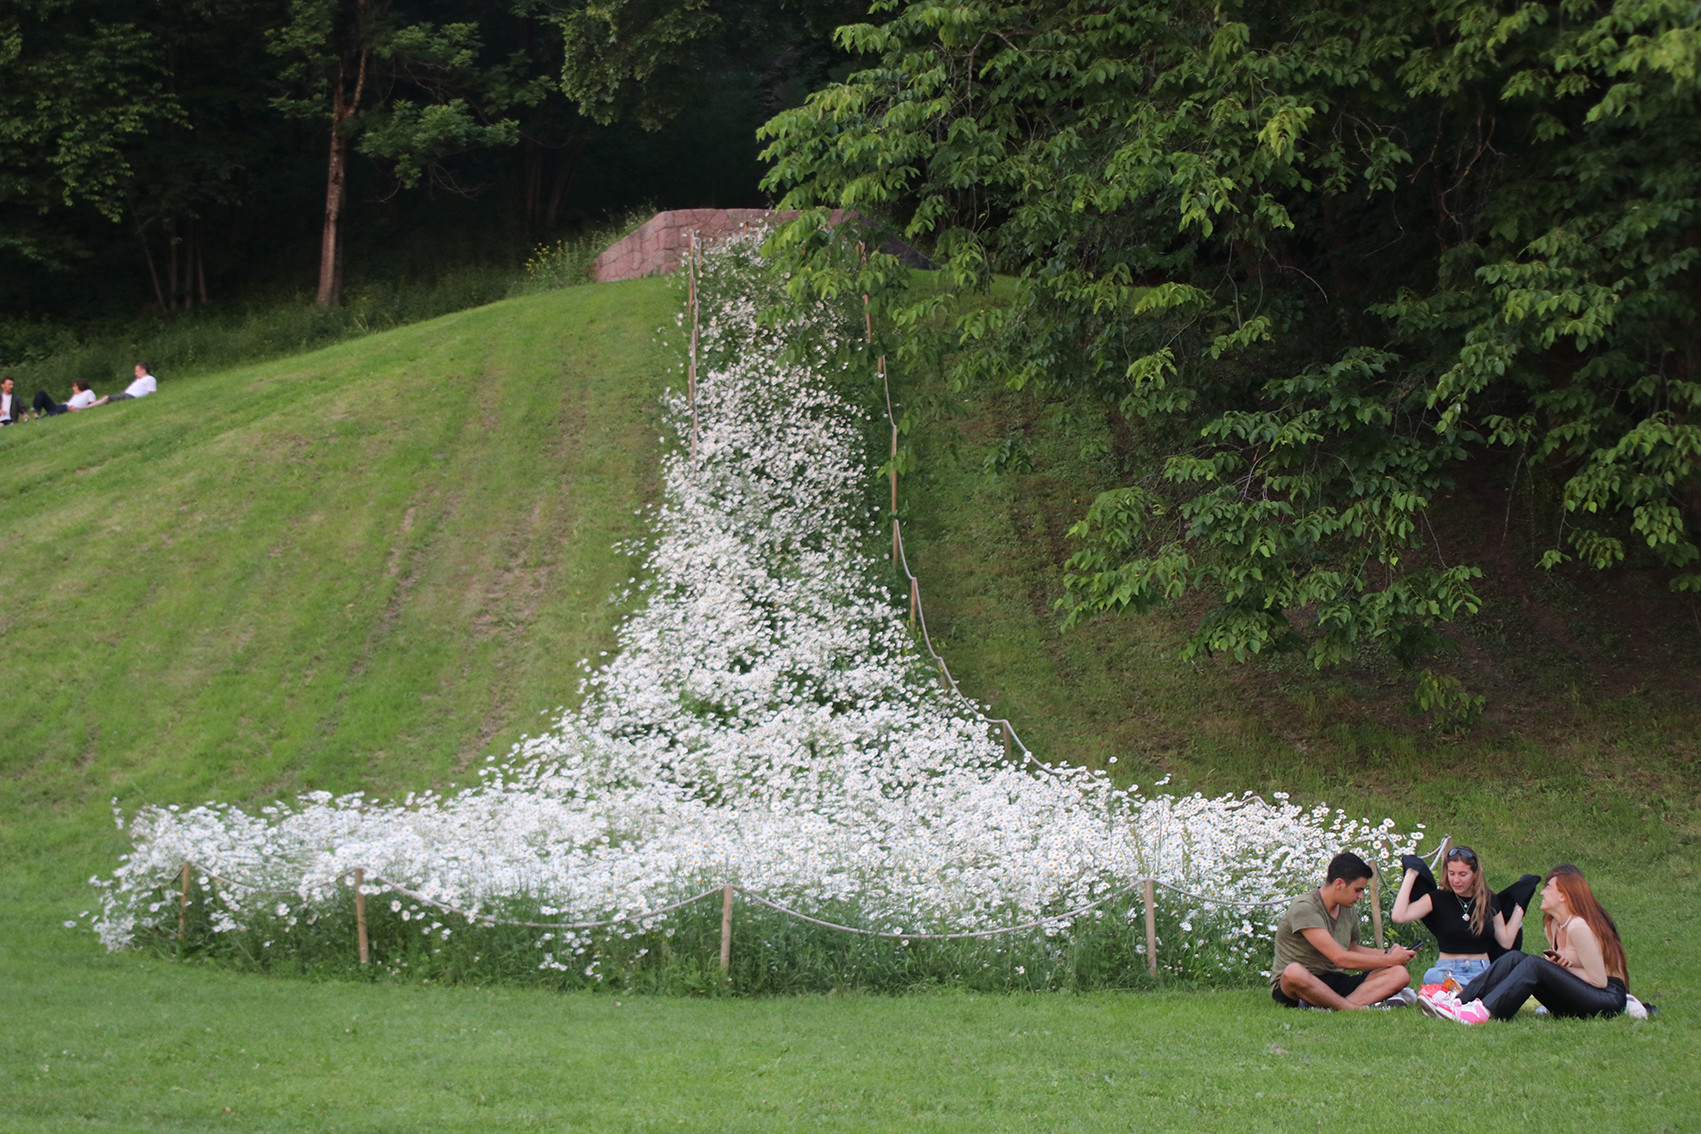 Colourphoto of a steep grass slope in a park. In the middle there is a large, elongated are with white blooming flowers. Trees in the background and tow small groups of people sitting on the surrounding lawn.